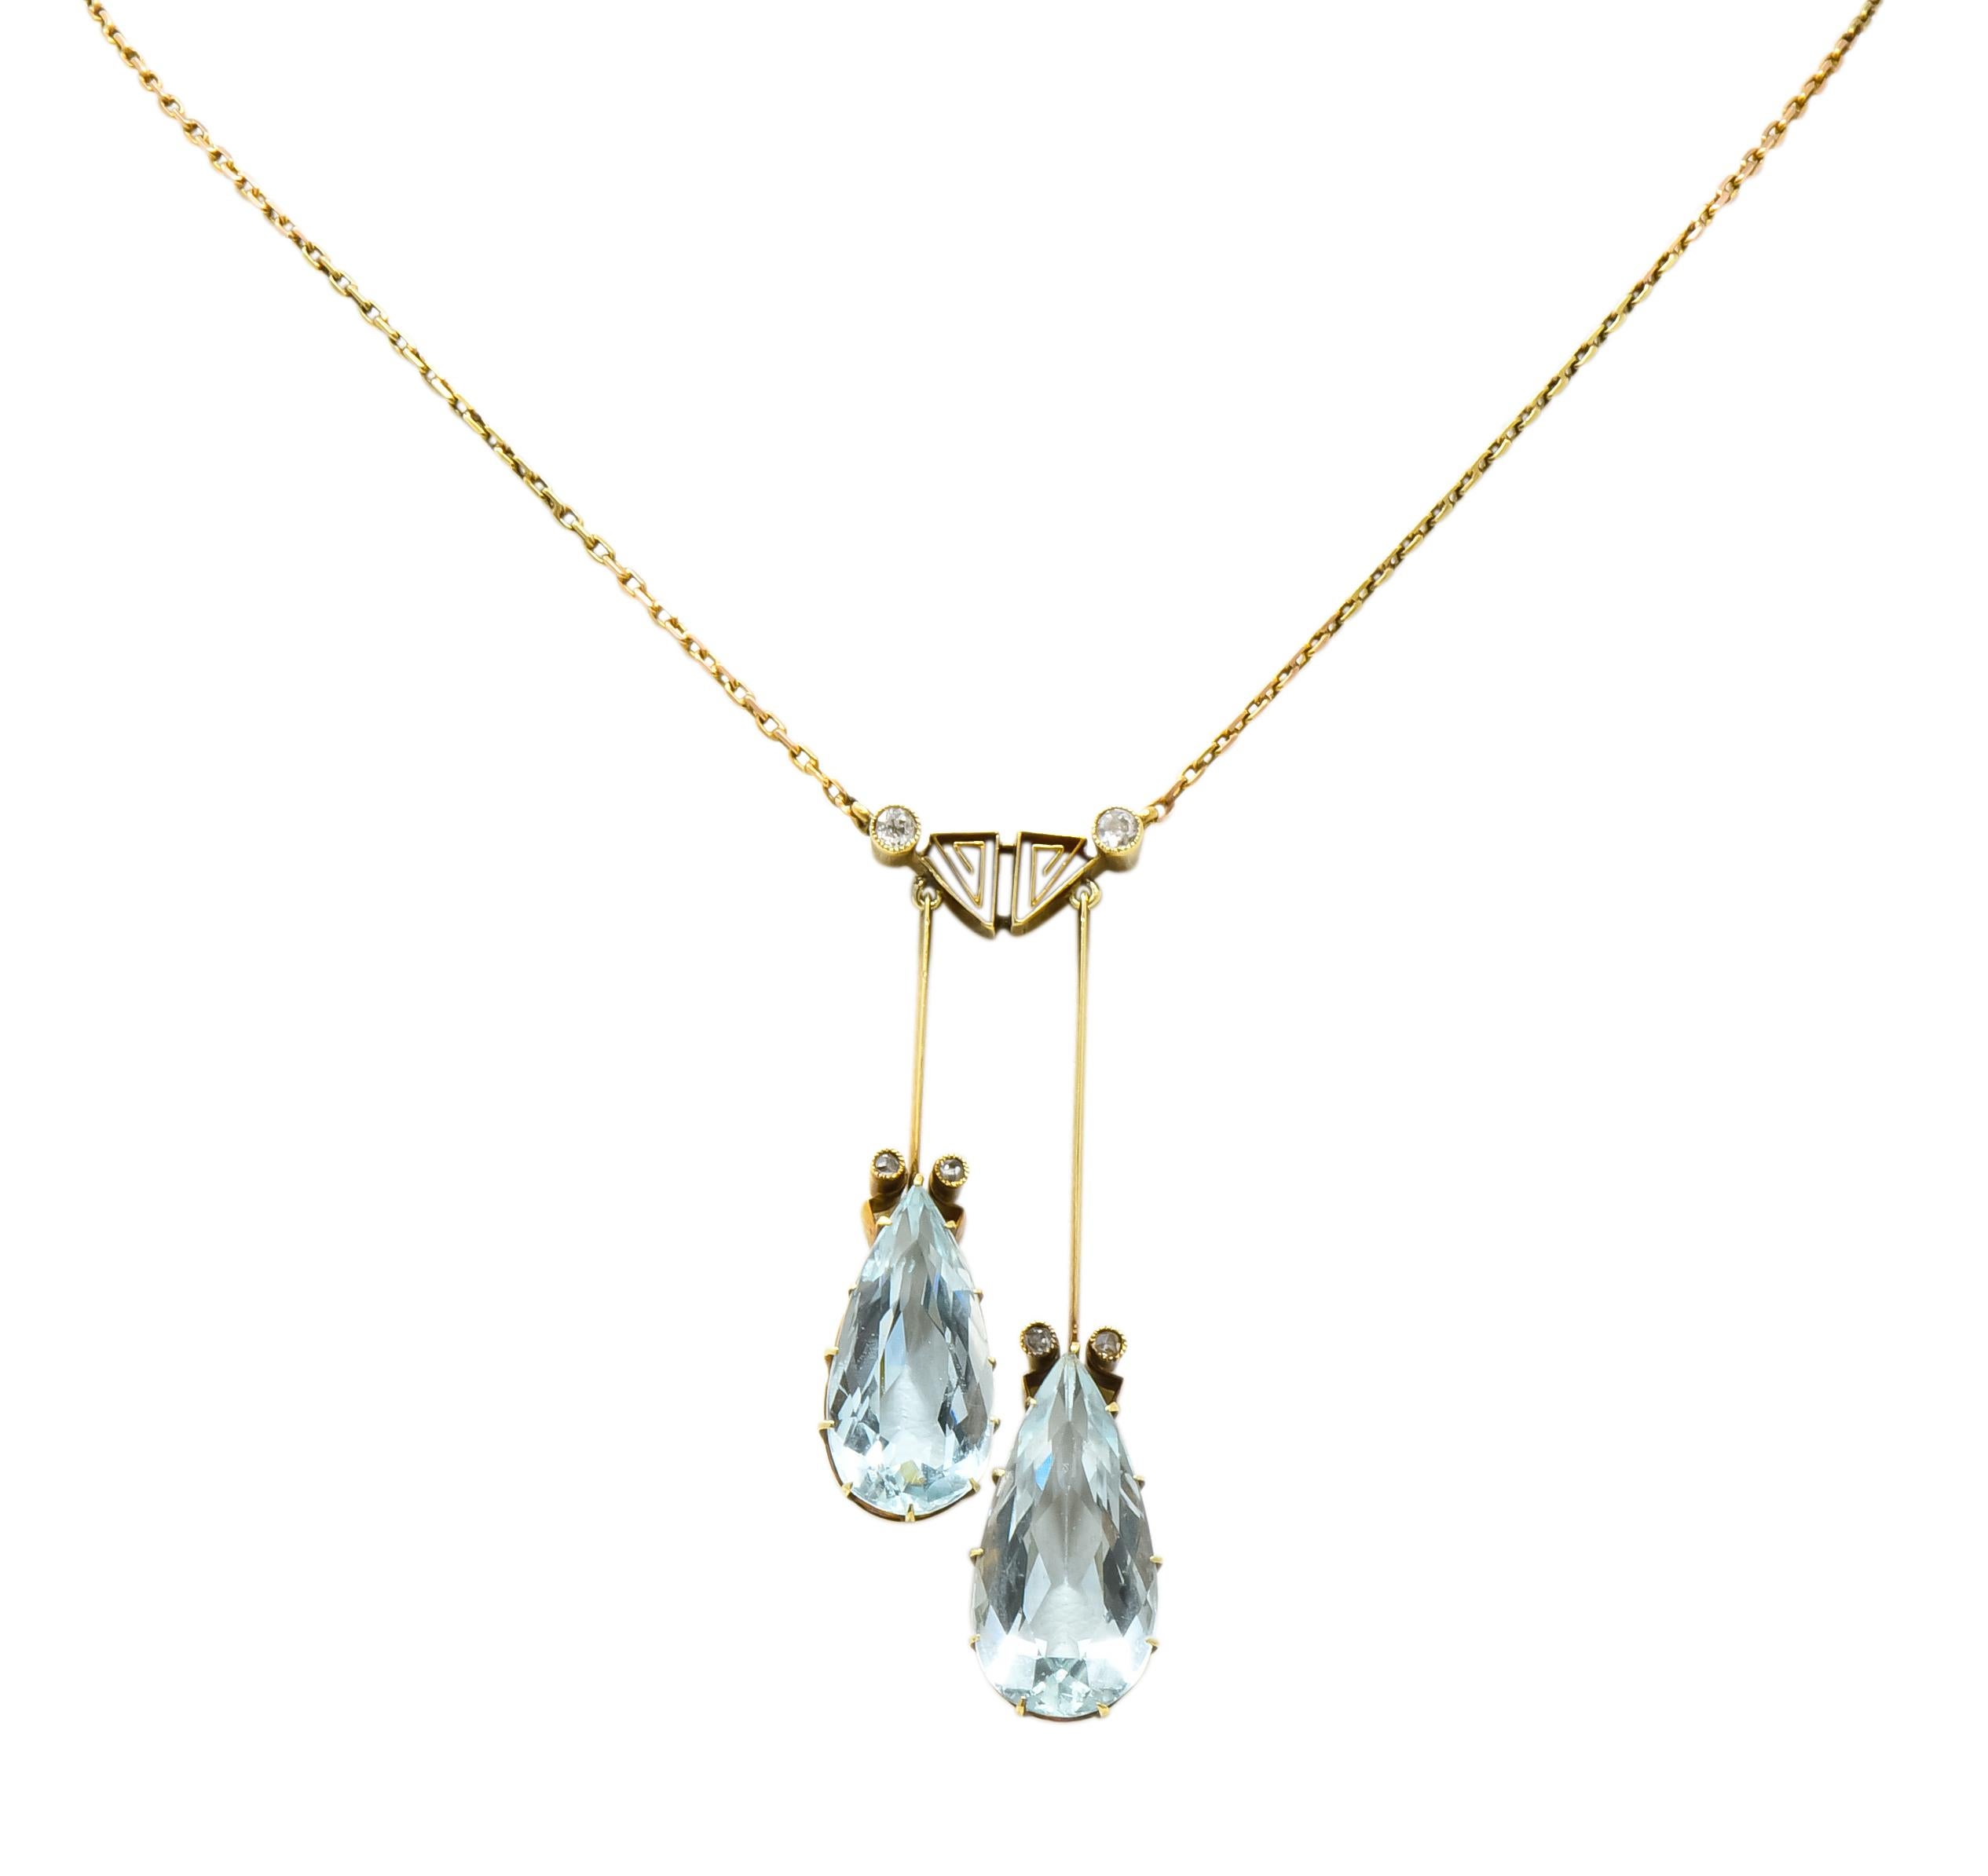 Centering two pear cut aquamarines weighing approximately 12.00 carats total, transparent and light blue in color

Claw set and suspended from two, articulated linear bars and stylized Greek key station

Accented by six bezel set rose cut and and